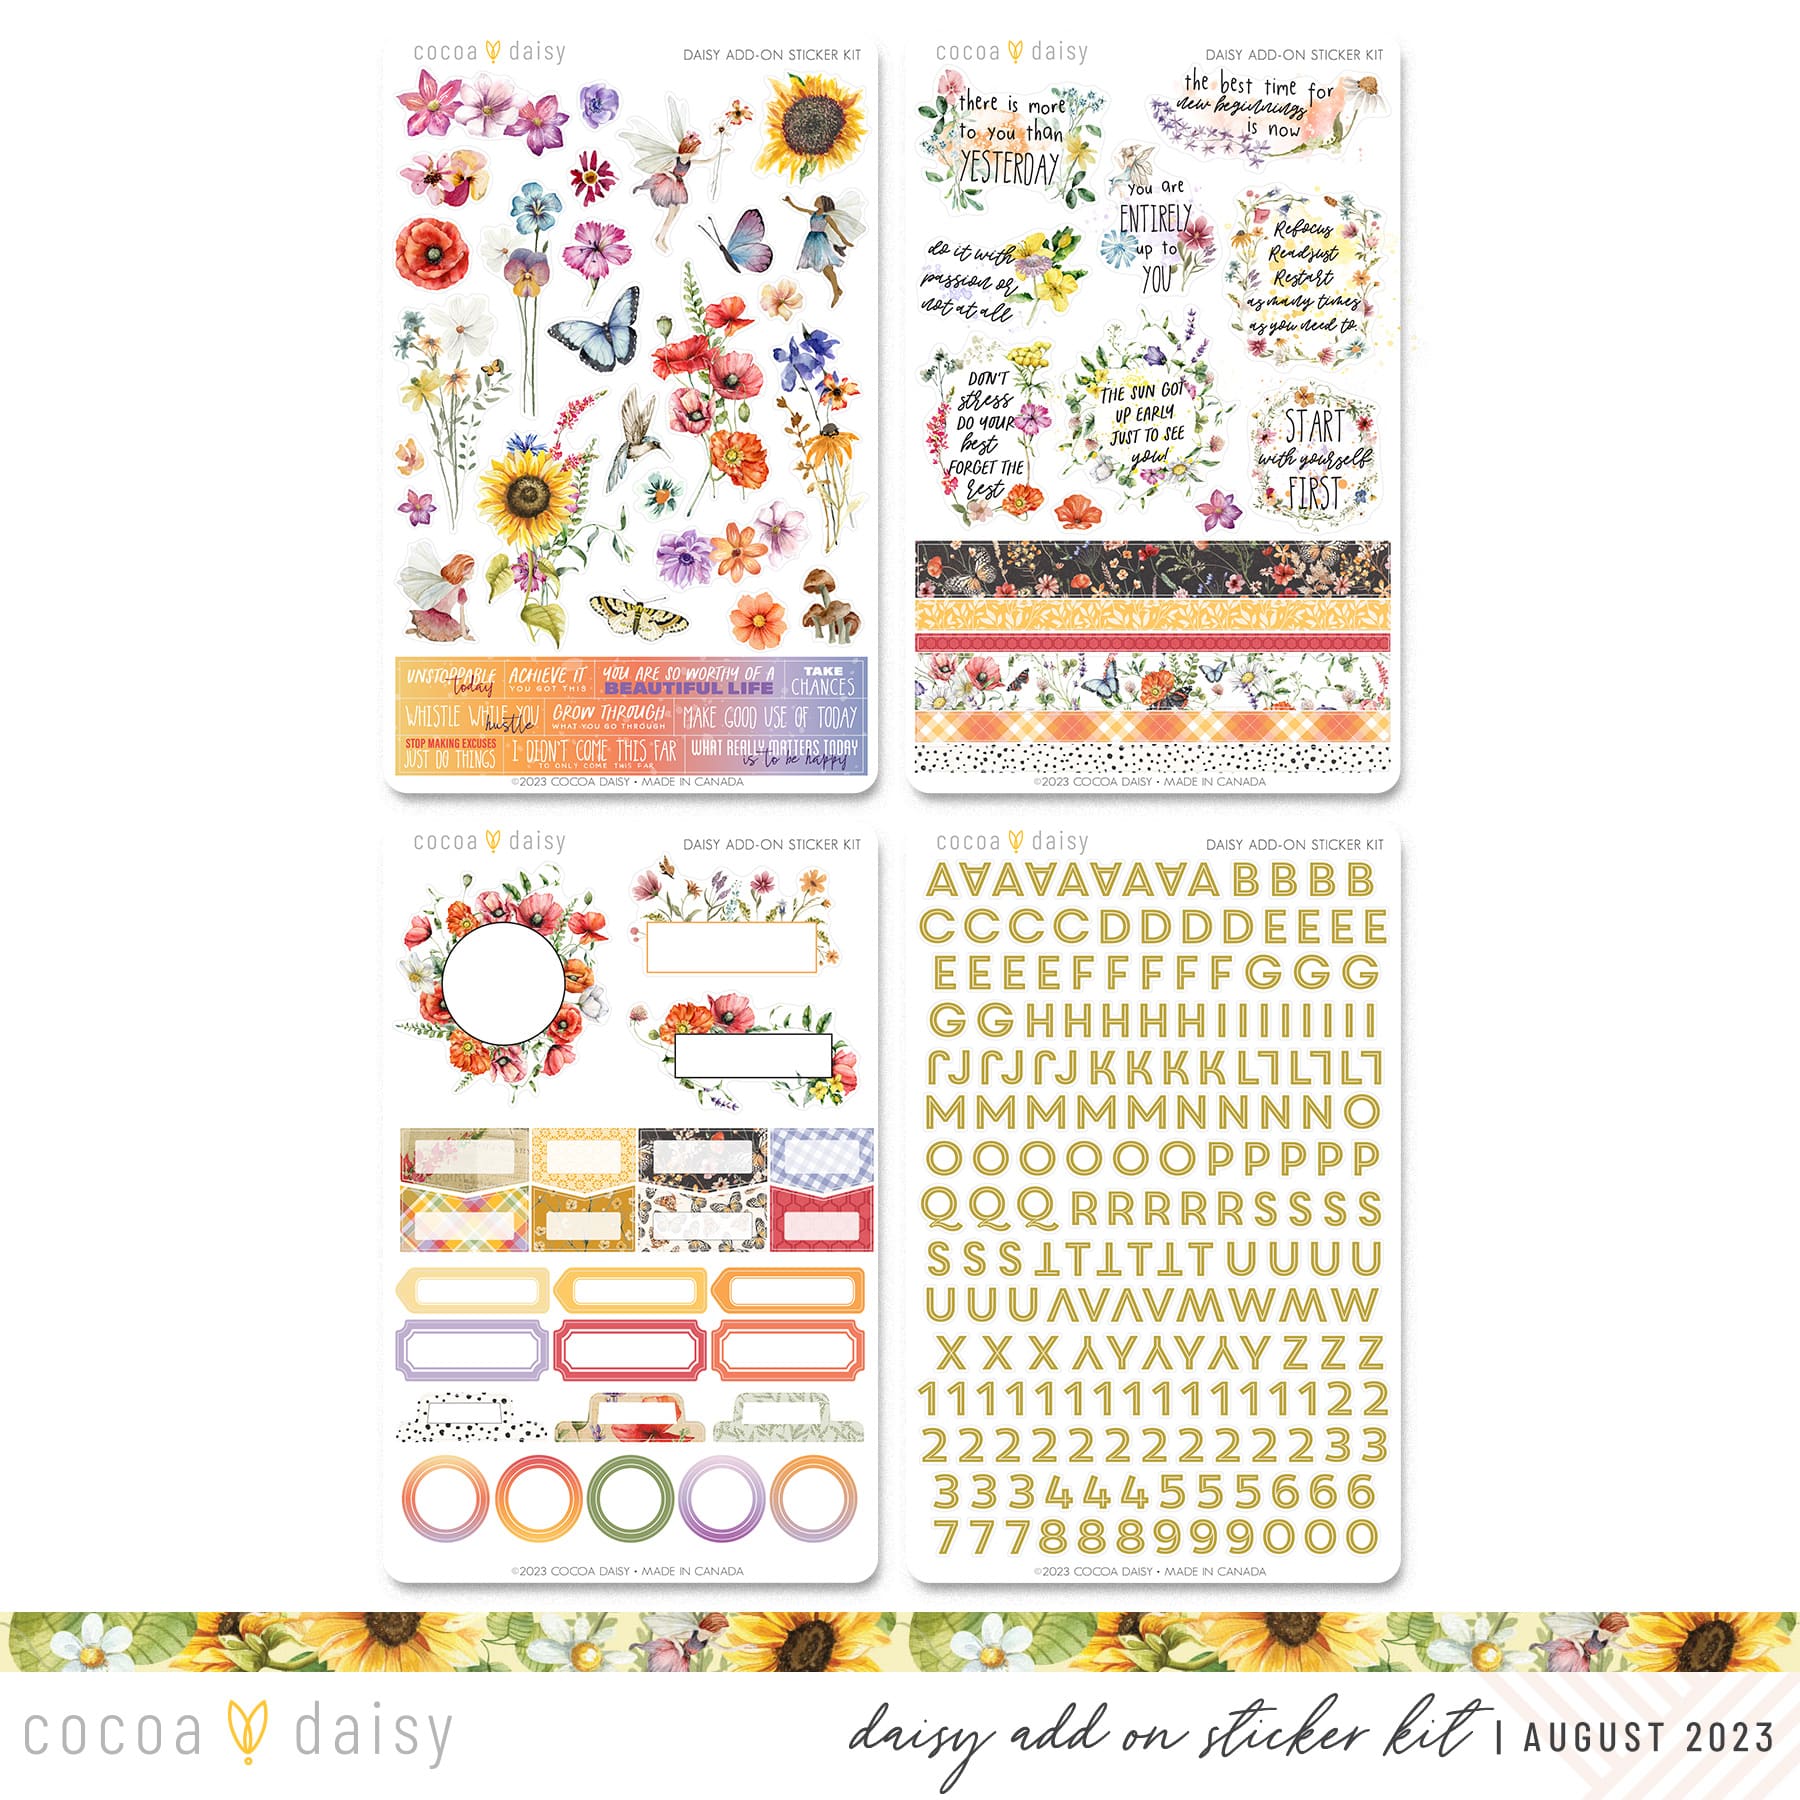 Daily Journal Scrapbooking Kit September 2023 – Cocoa Daisy